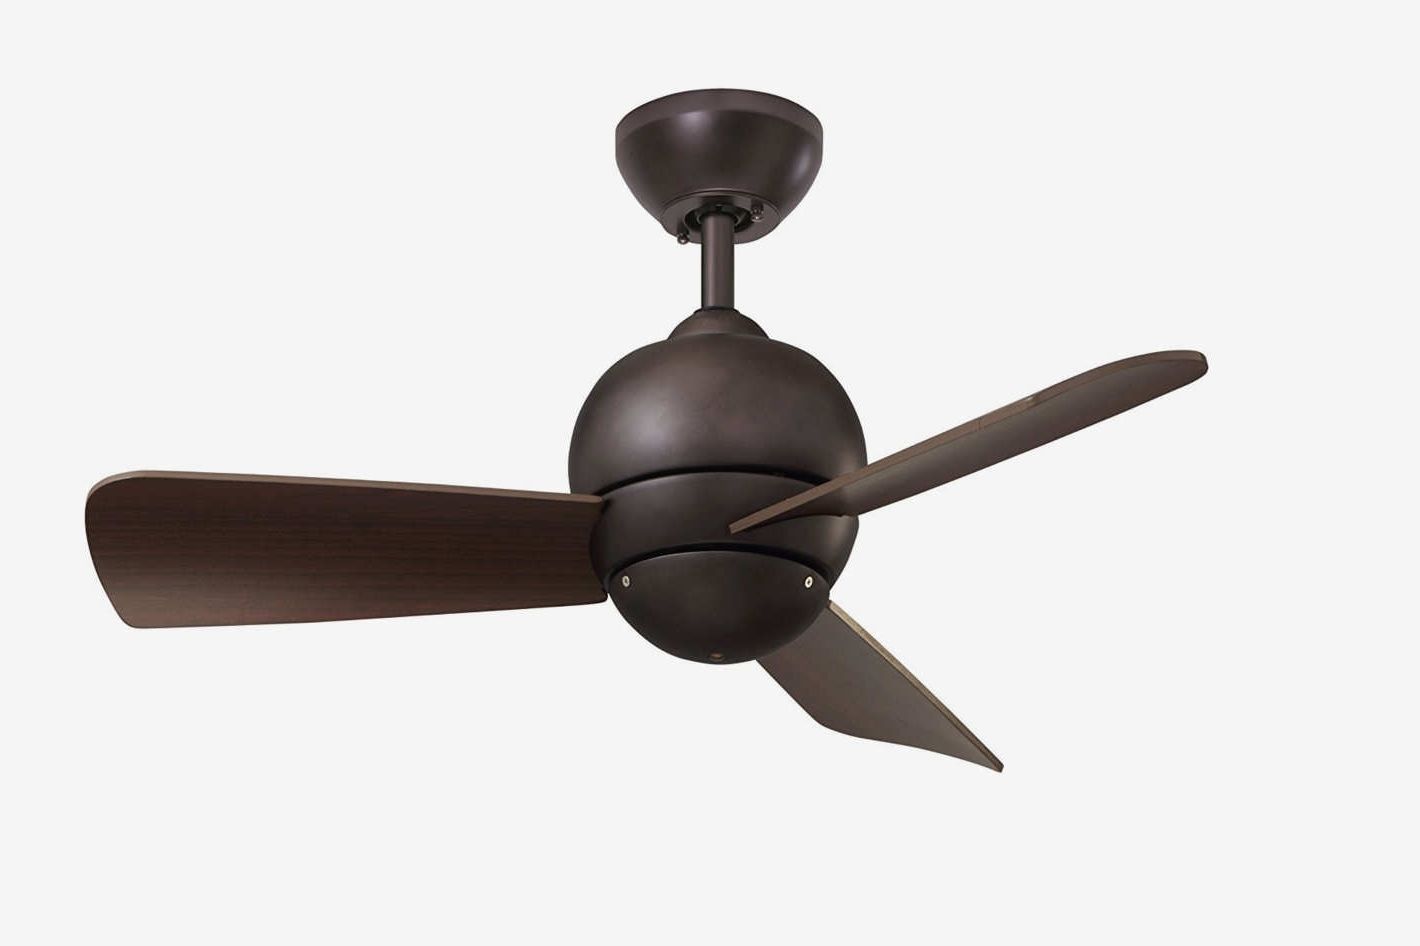 Fashionable The 9 Best Ceiling Fans On Amazon 2018 With Regard To Outdoor Ceiling Fans Under $ (View 12 of 20)